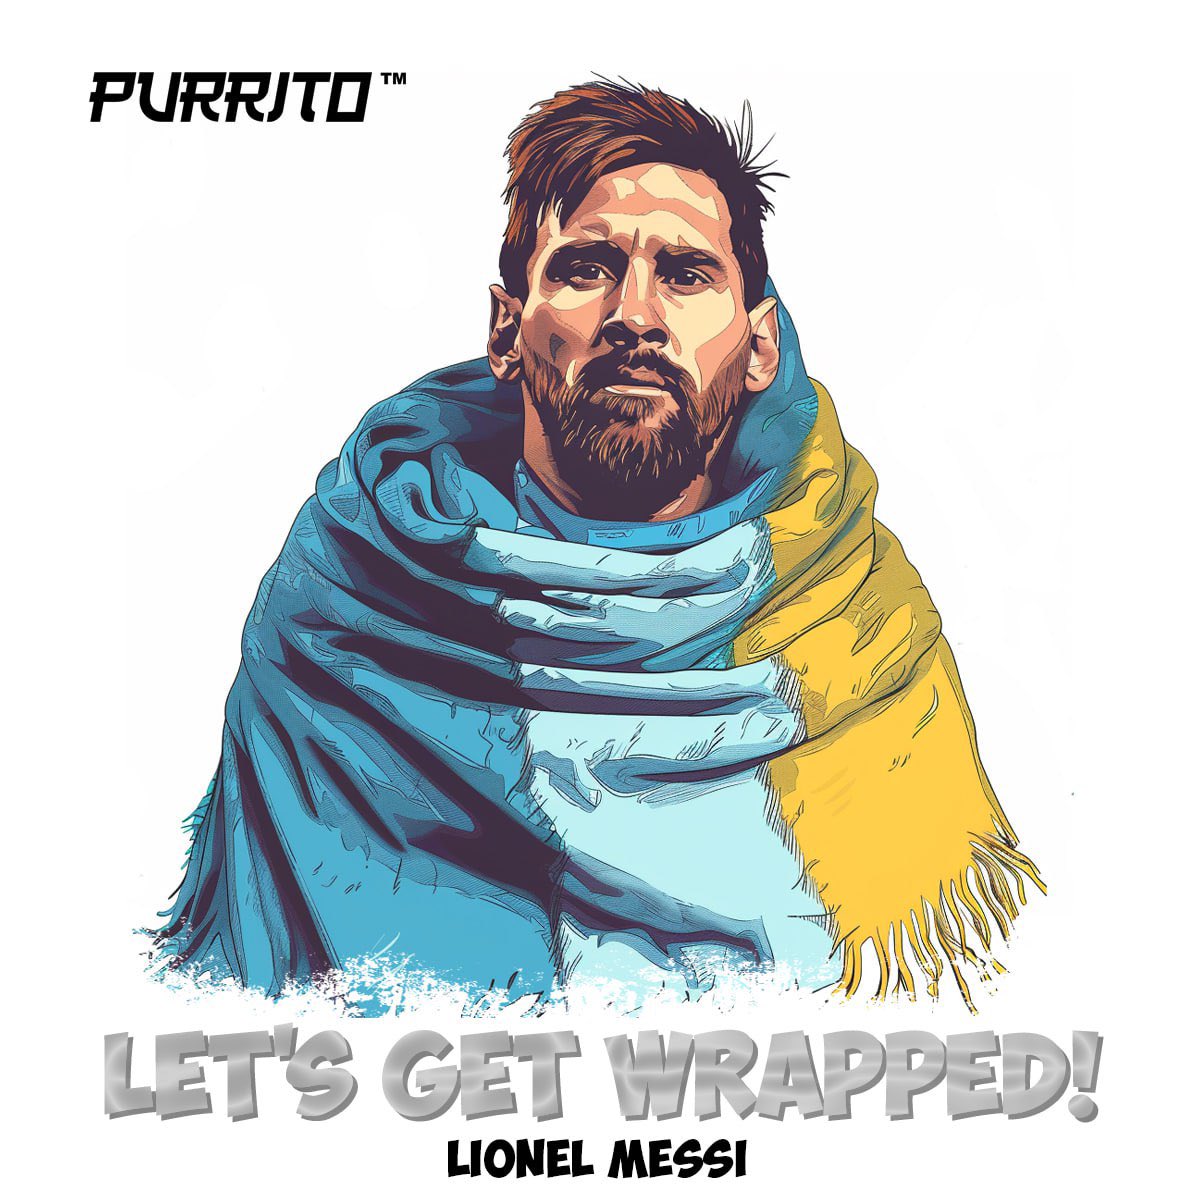 @binance Ayoo @Cristiano Let‘s #GetWrapped Check out #Purrito @Purrito_Wrapped